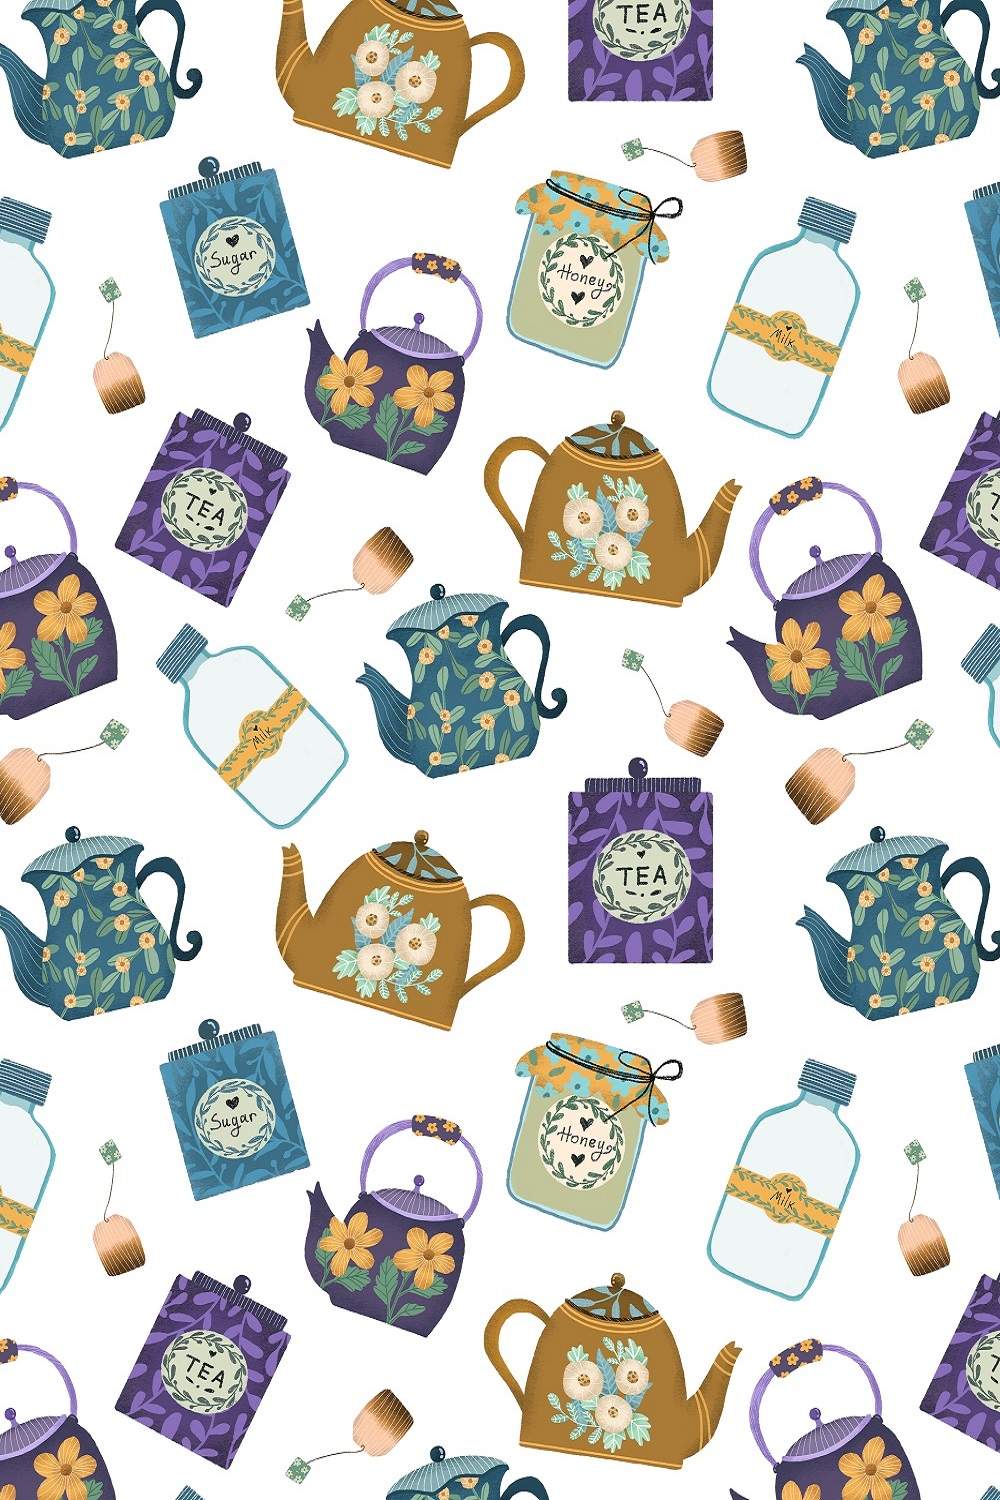 Morning tea clipart, patterns, premade posters set pinterest preview image.